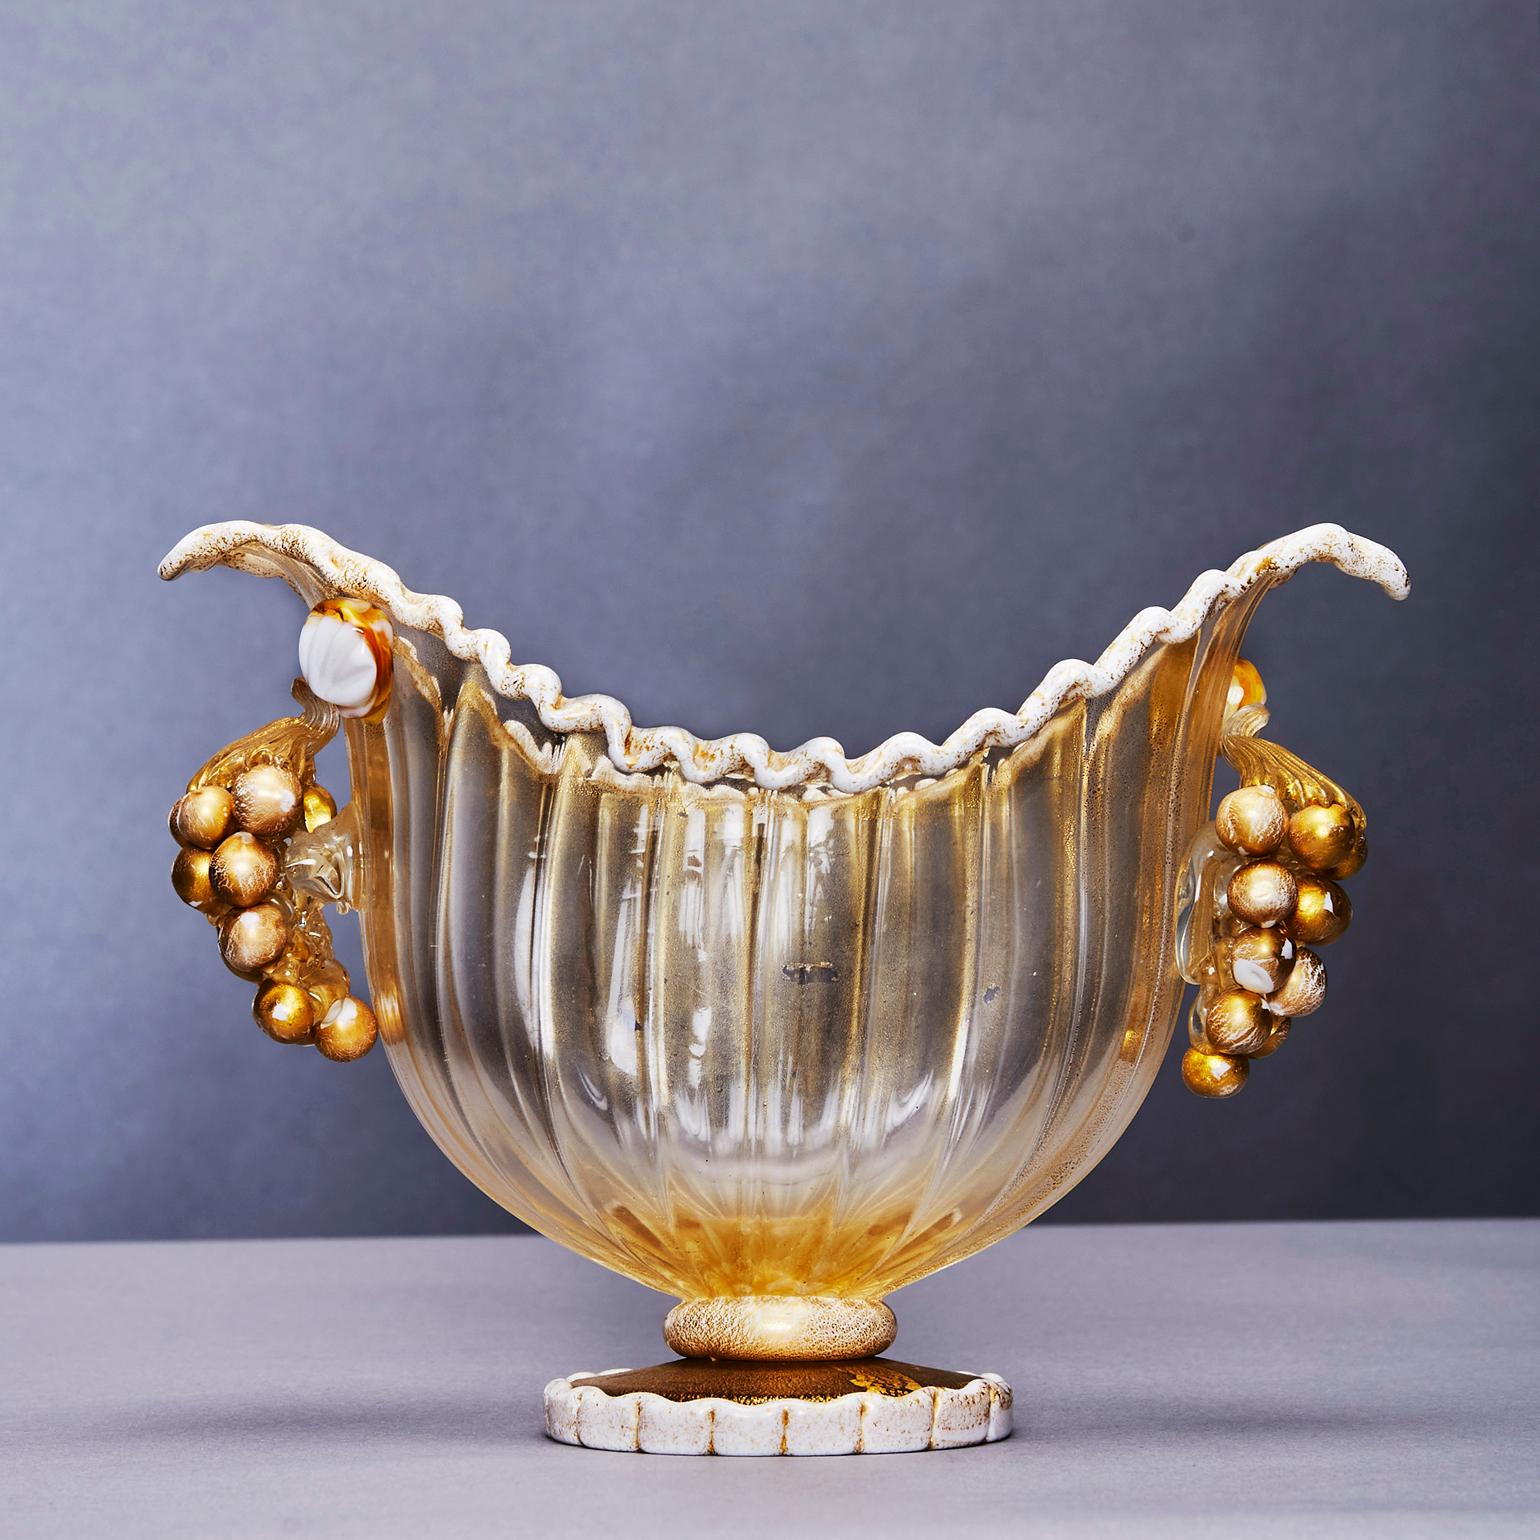 Mid-Century Modern Footed Bowl Gold Leaf and Grapes, Ercole Barovier for Barovier Toso & Co 1949 For Sale